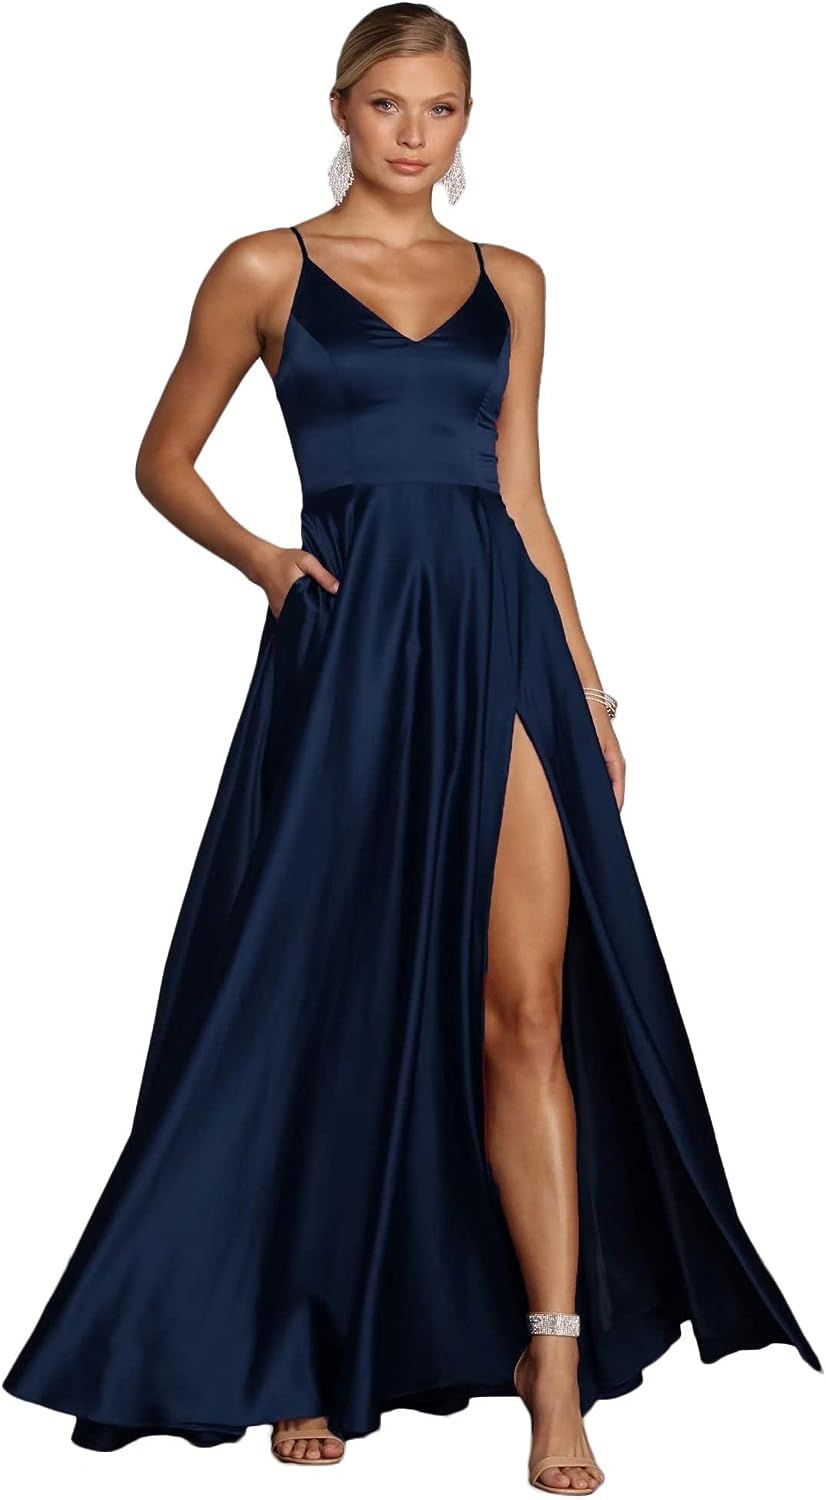 SMORBRID Women's Spaghetti Strap Prom Dresses Long with Pockets Satin Formal Evening Party Gowns ... | Amazon (US)